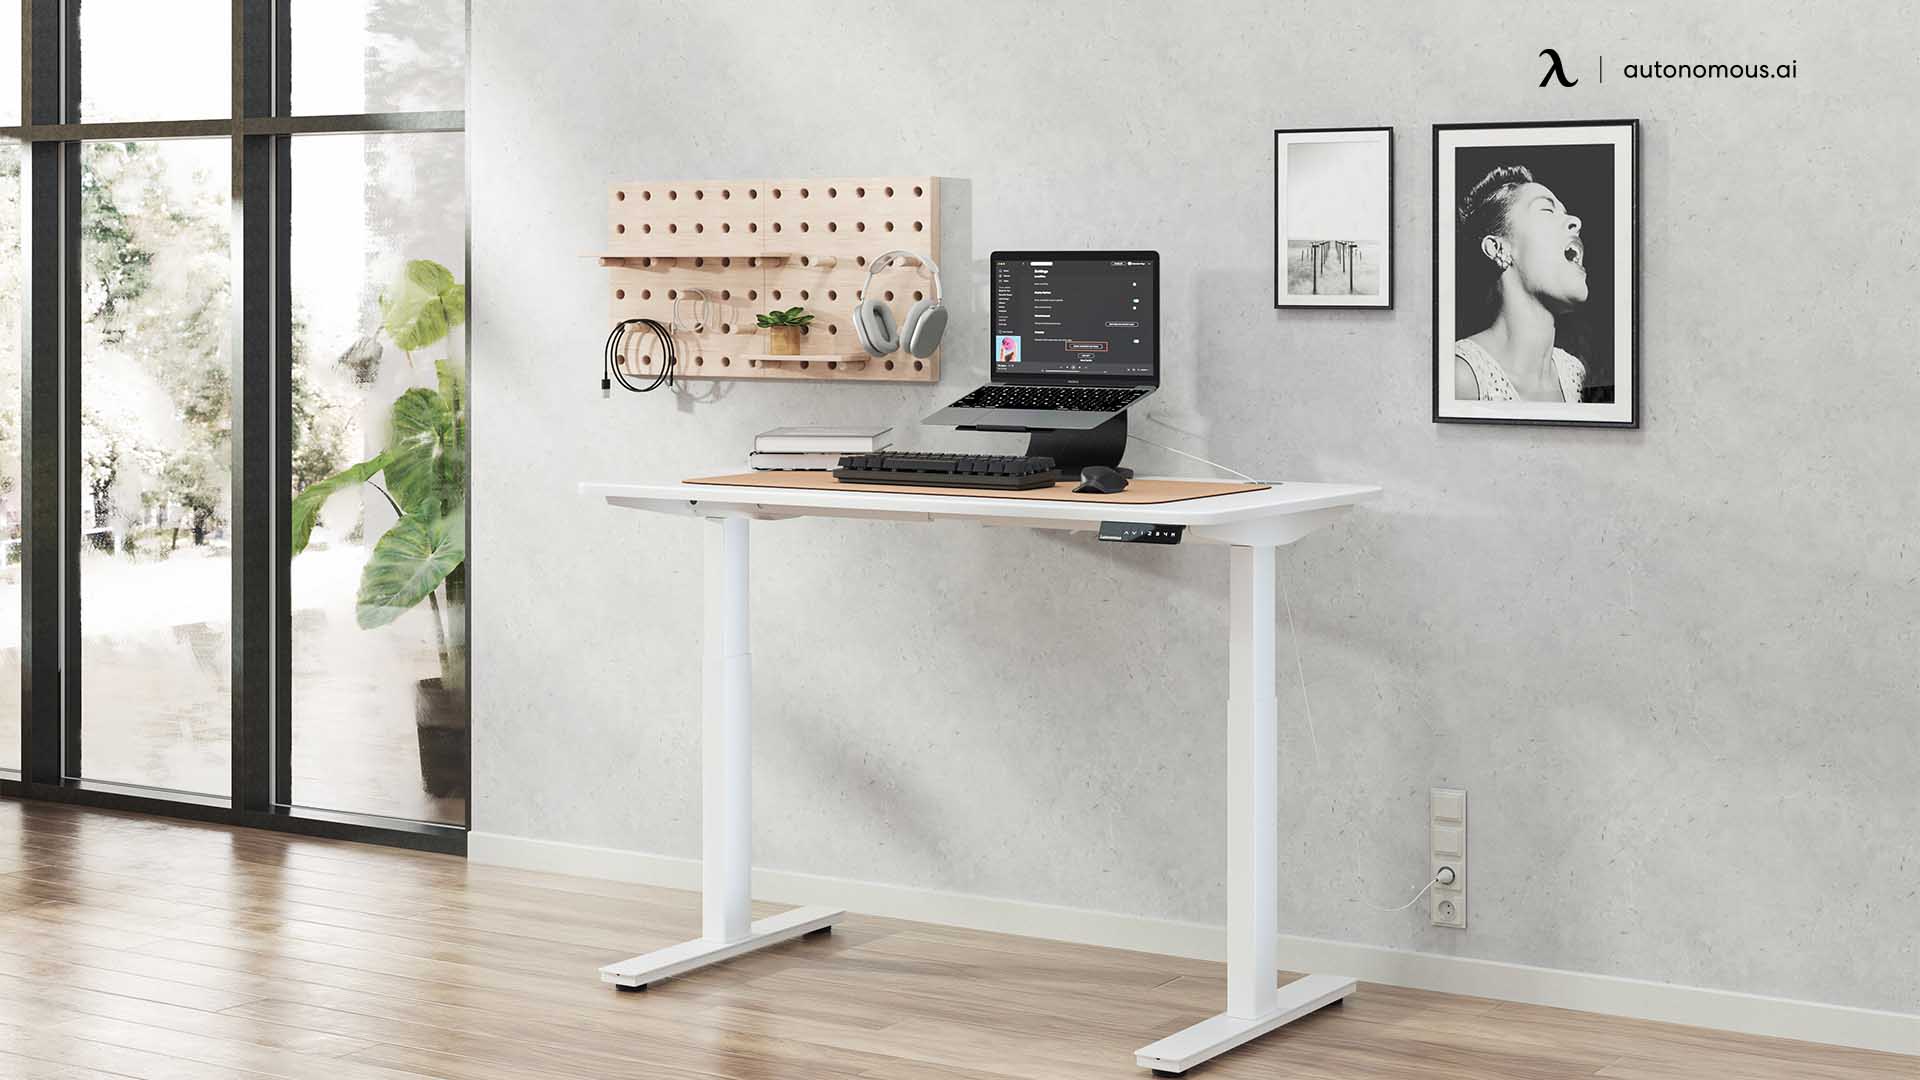 Choose a specific zone in minimalist modern home office